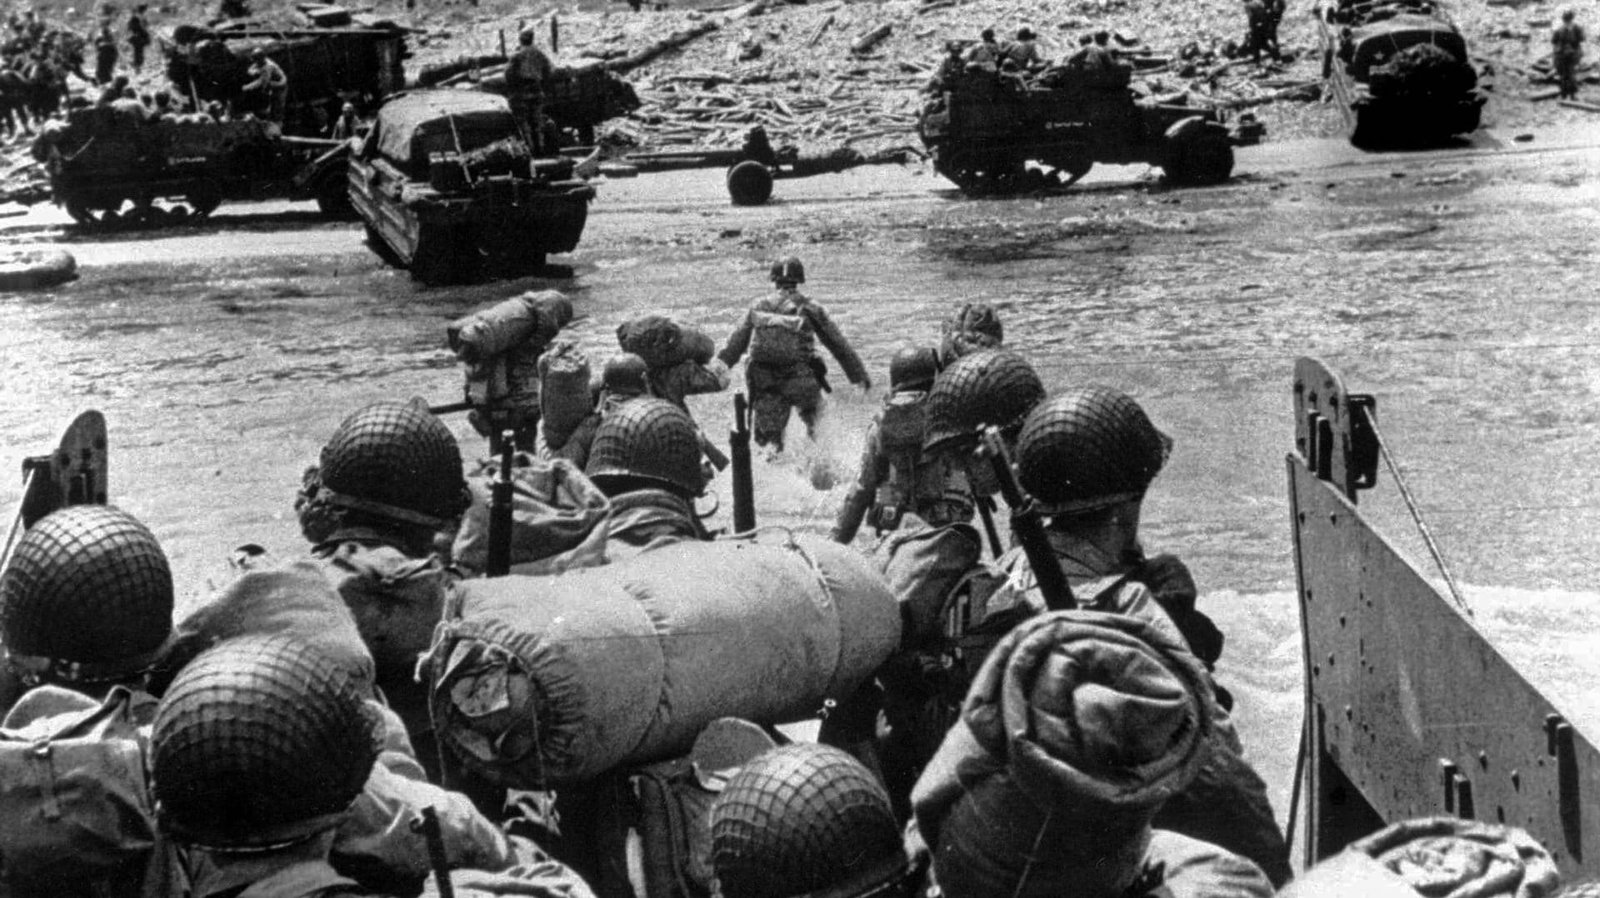 National WWII Museum Commemorates 75th Anniversary of DDay in Normandy